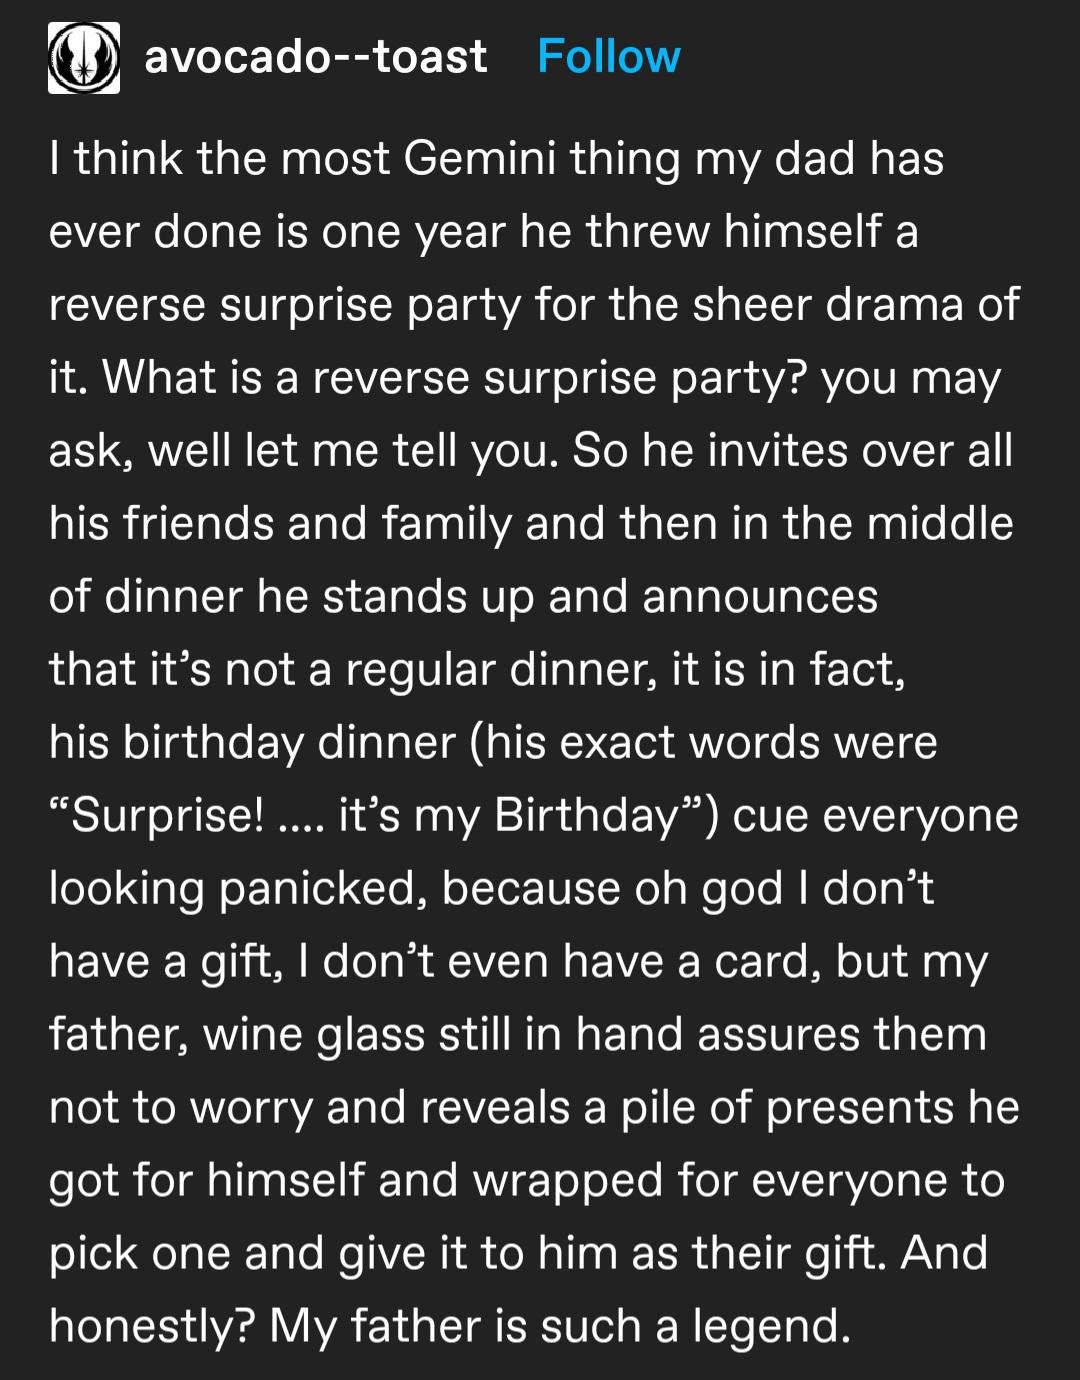 Reverse surprise party sounds nice, actually.